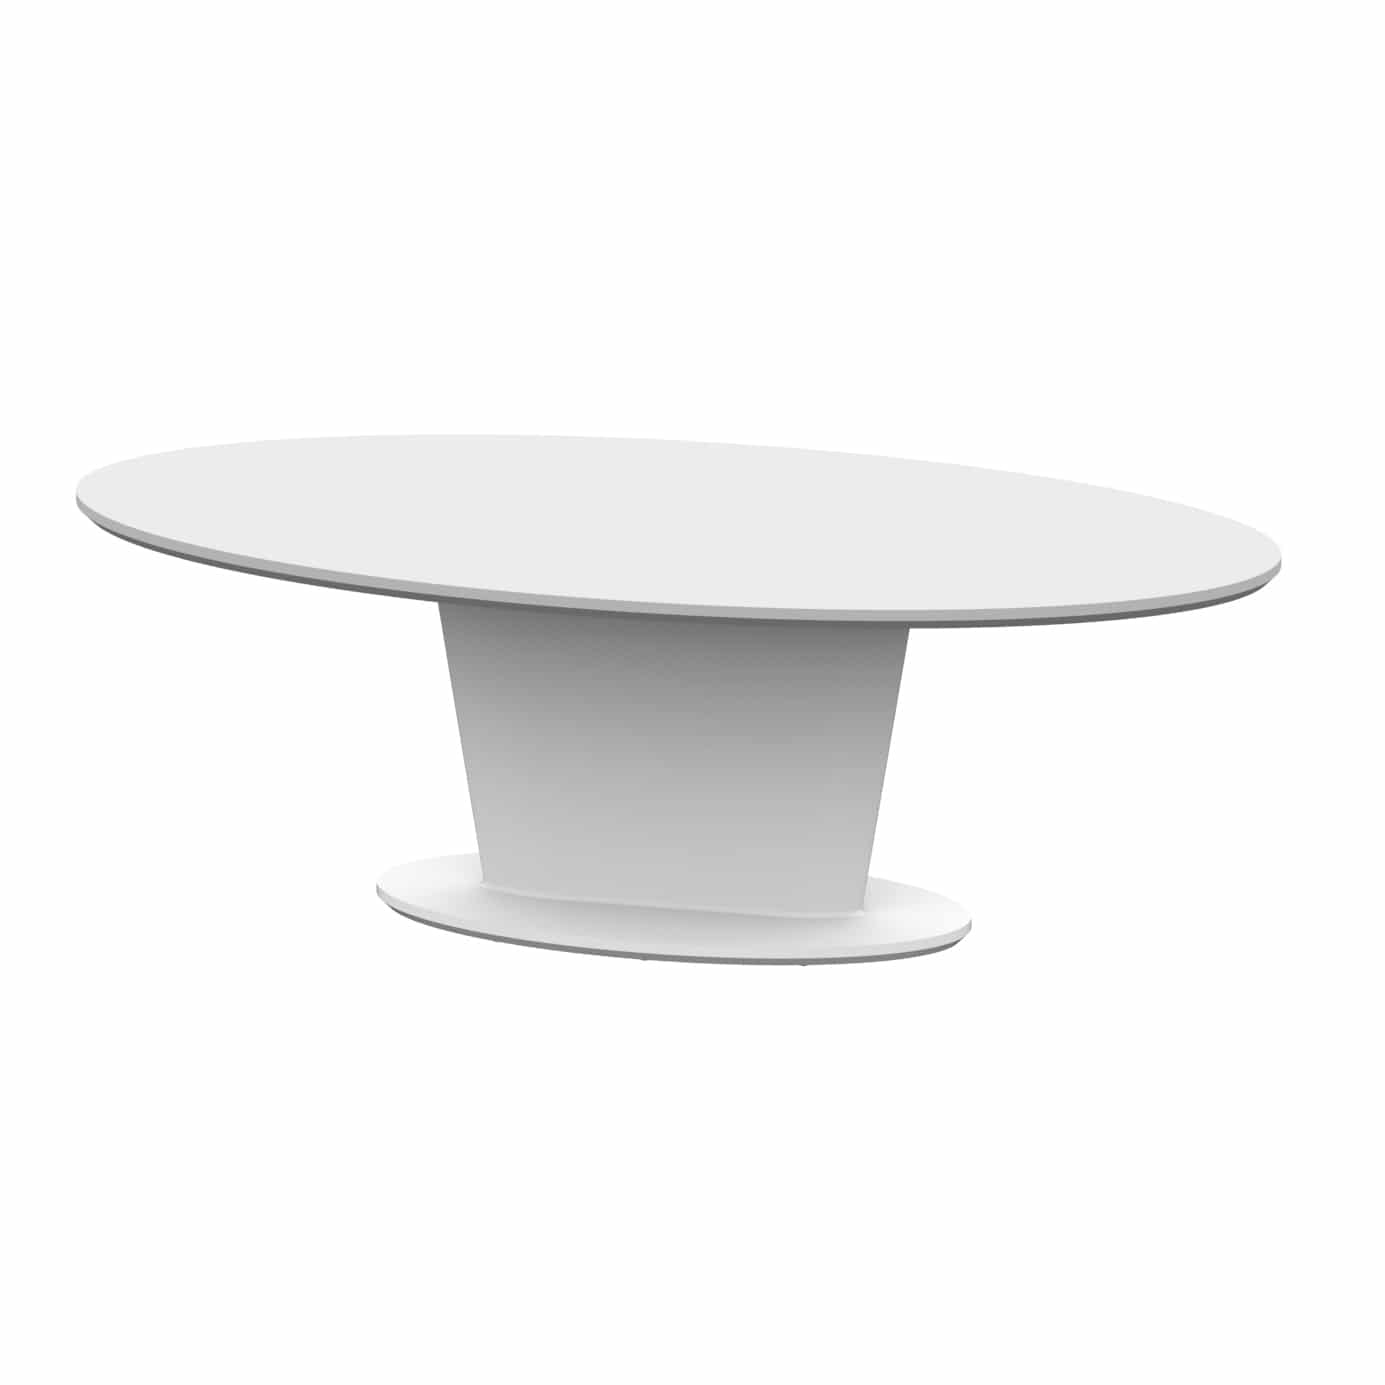 LAVA OVAL DINING TABLE 220x100xH76Cm.157